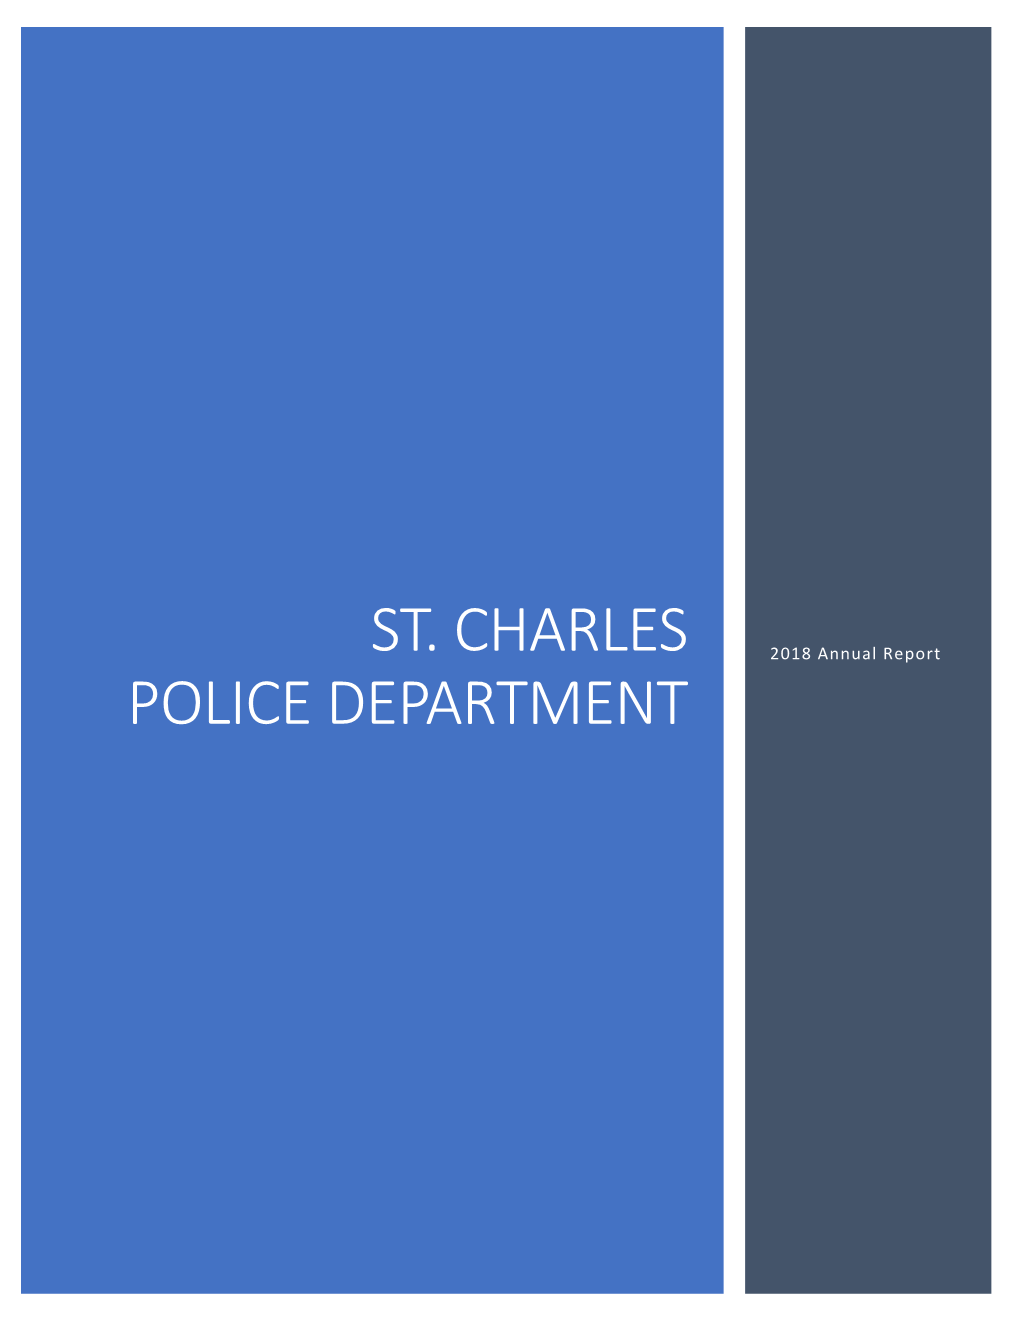 St. Charles Police Department Annual Report